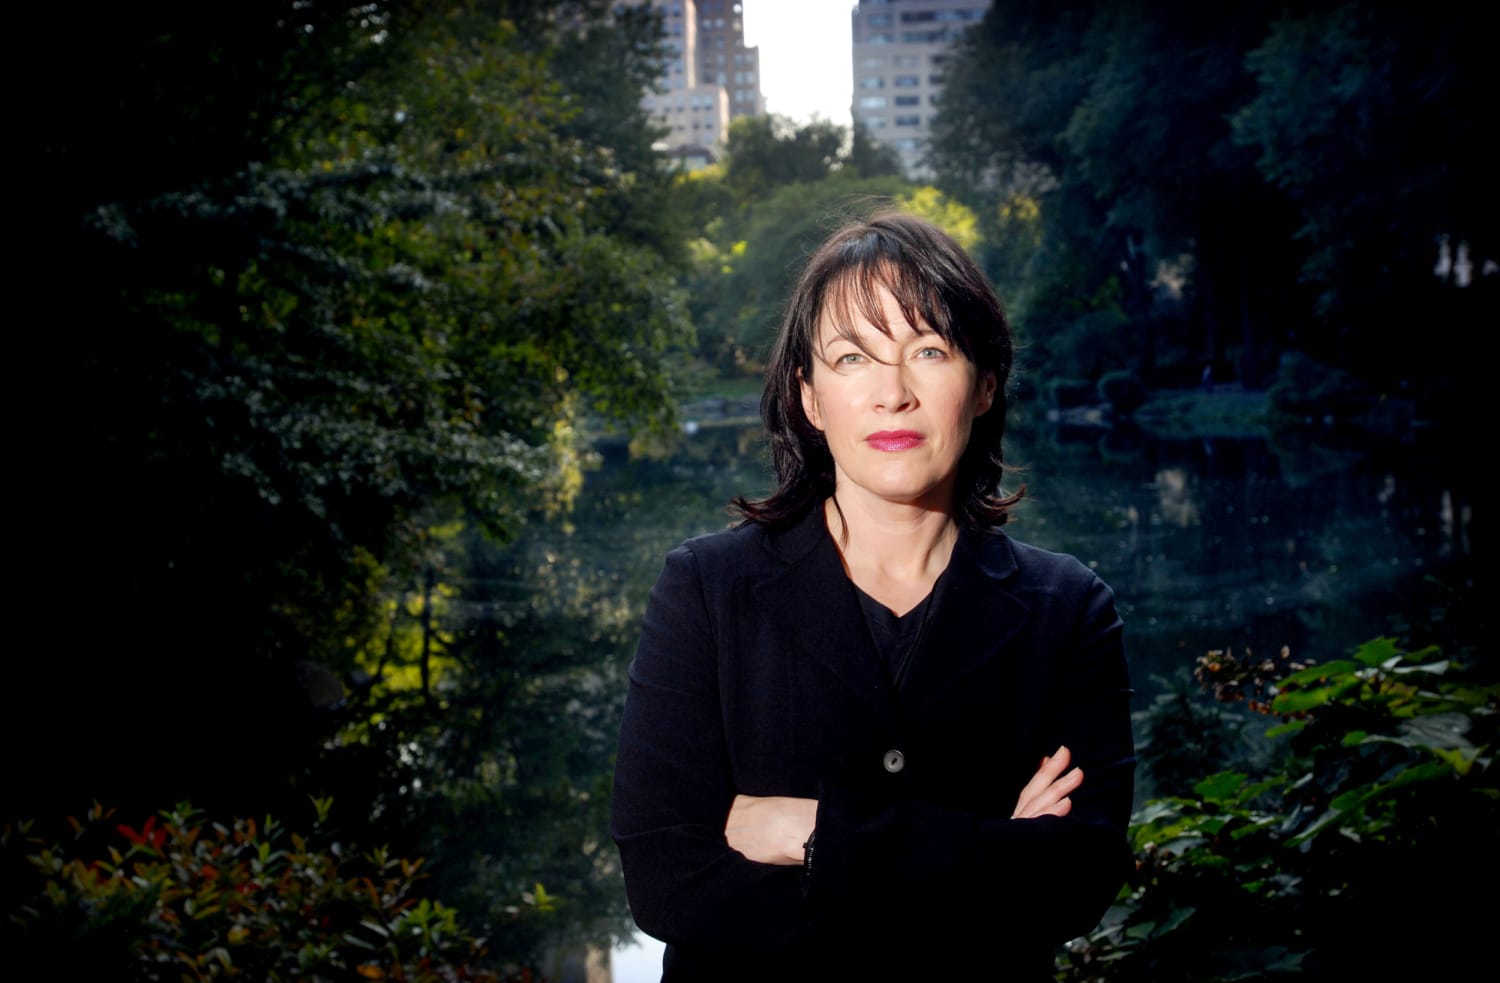 Author Alice Sebold apologizes to man cleared of rape at the center of her memoir ‘Lucky’